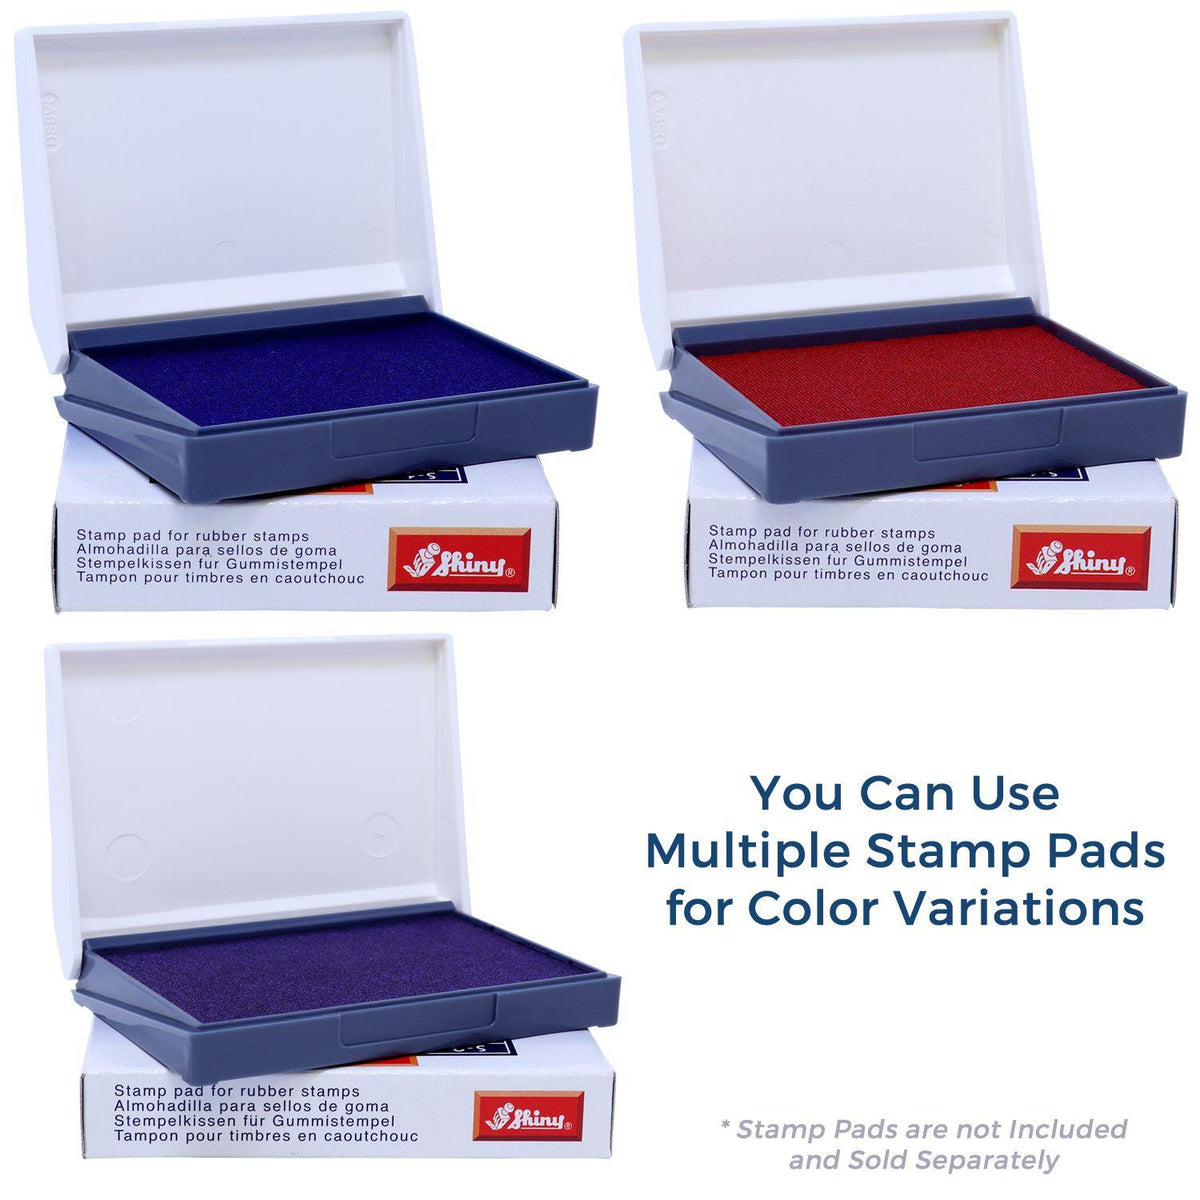 Stamp Pads for Large Chart Thinned On Rubber Stamp Available